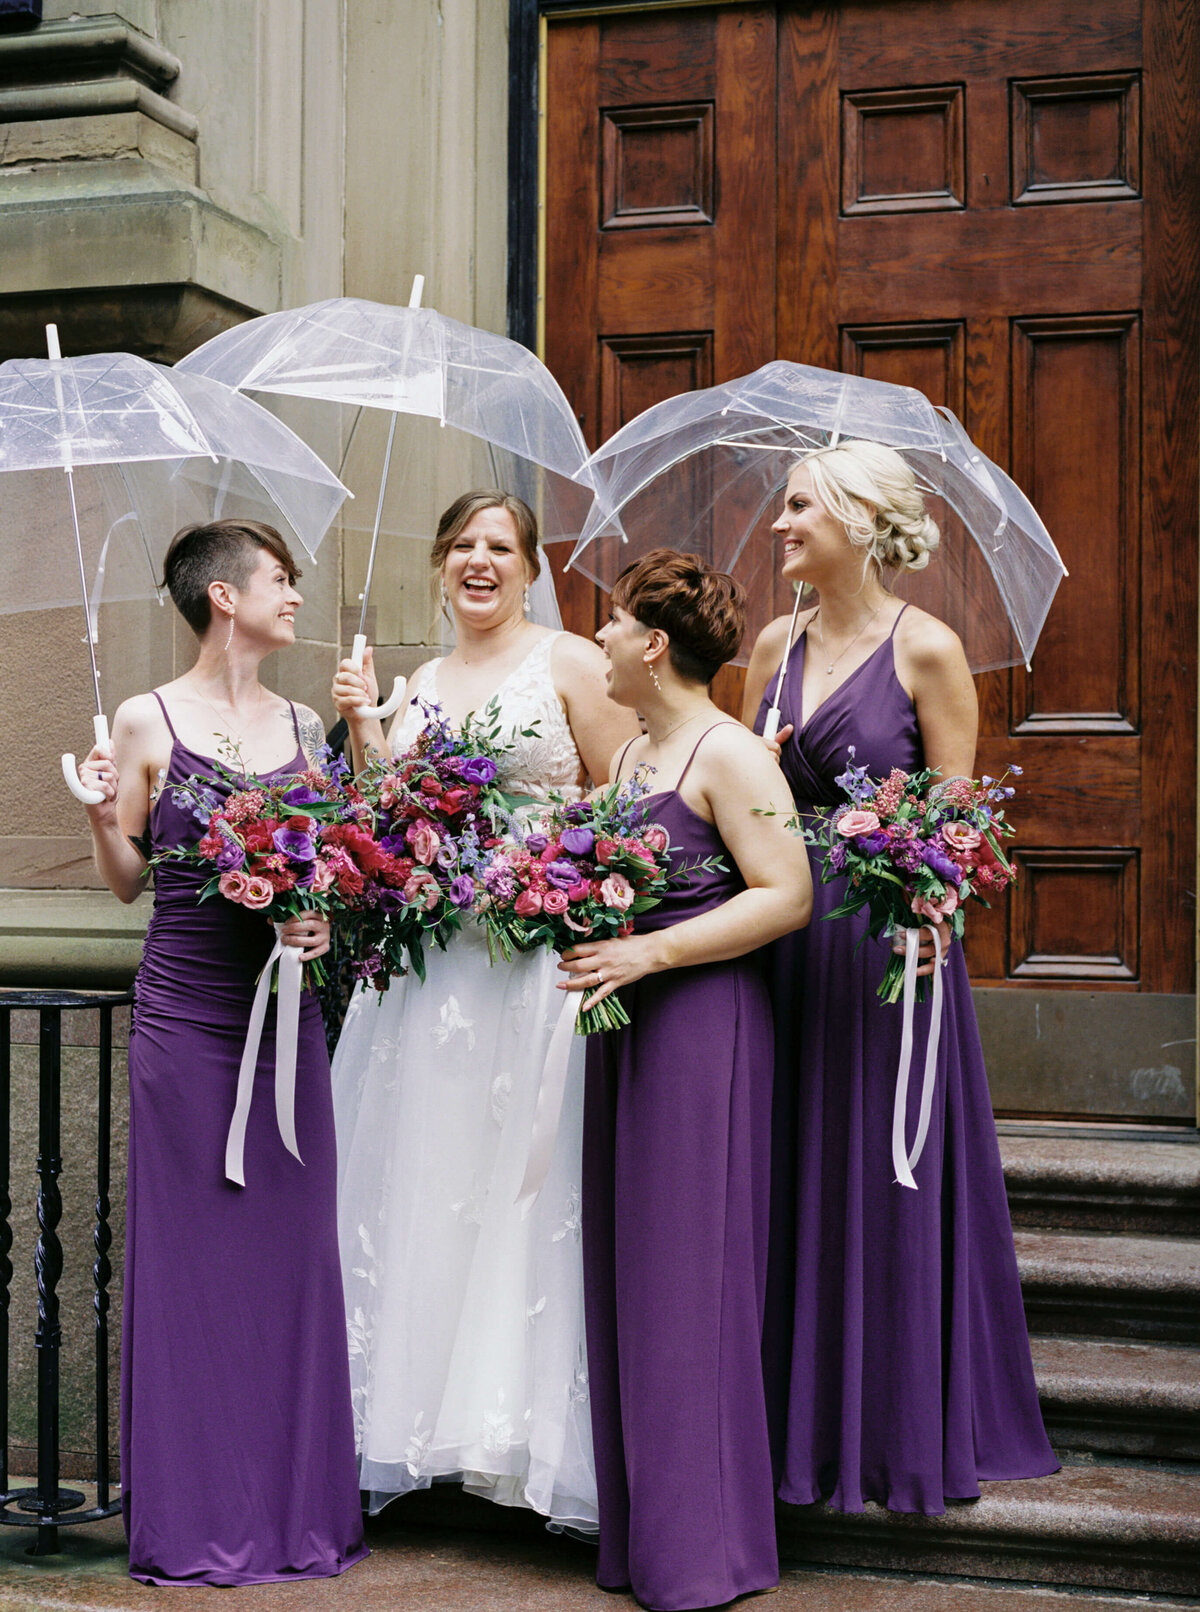 Bride with bridesmaids wearing purple dresses and umbrellas standing outside the Halifax Club in Nova Scotia